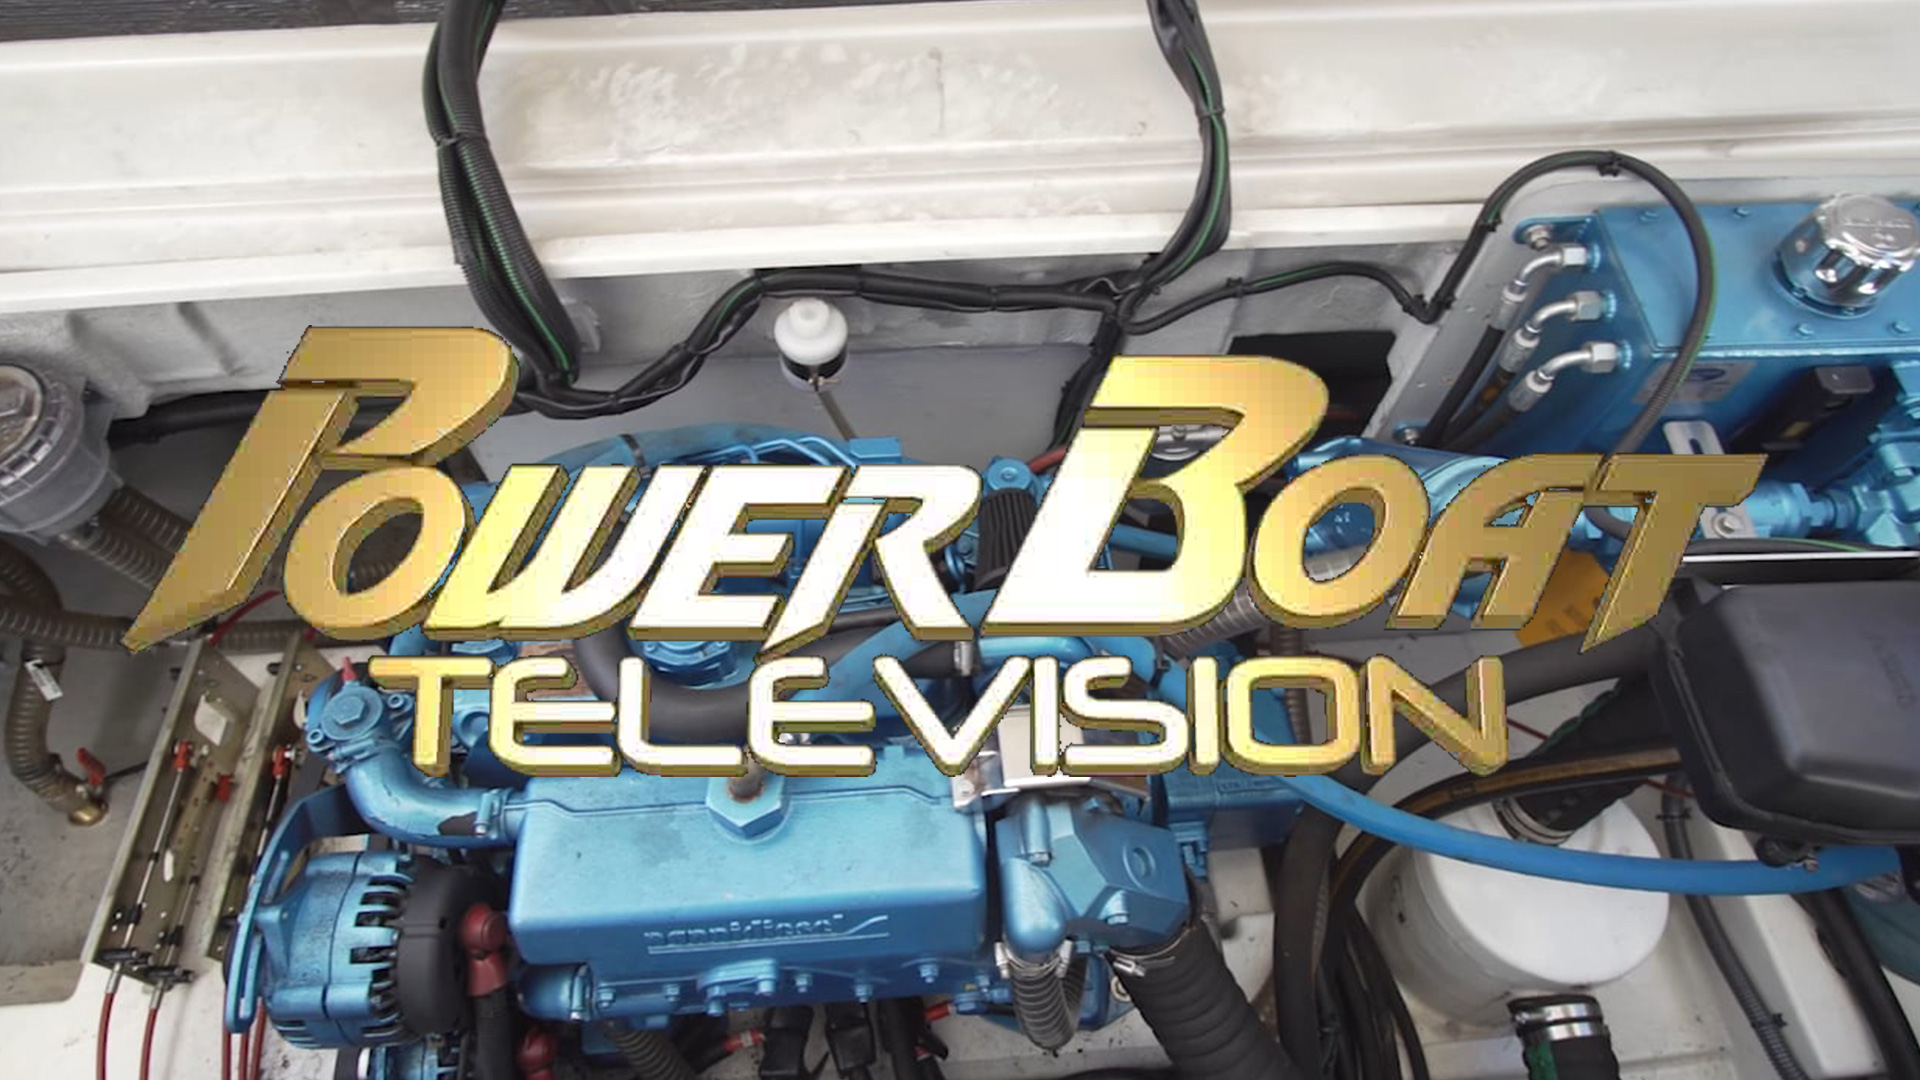 powerboat television